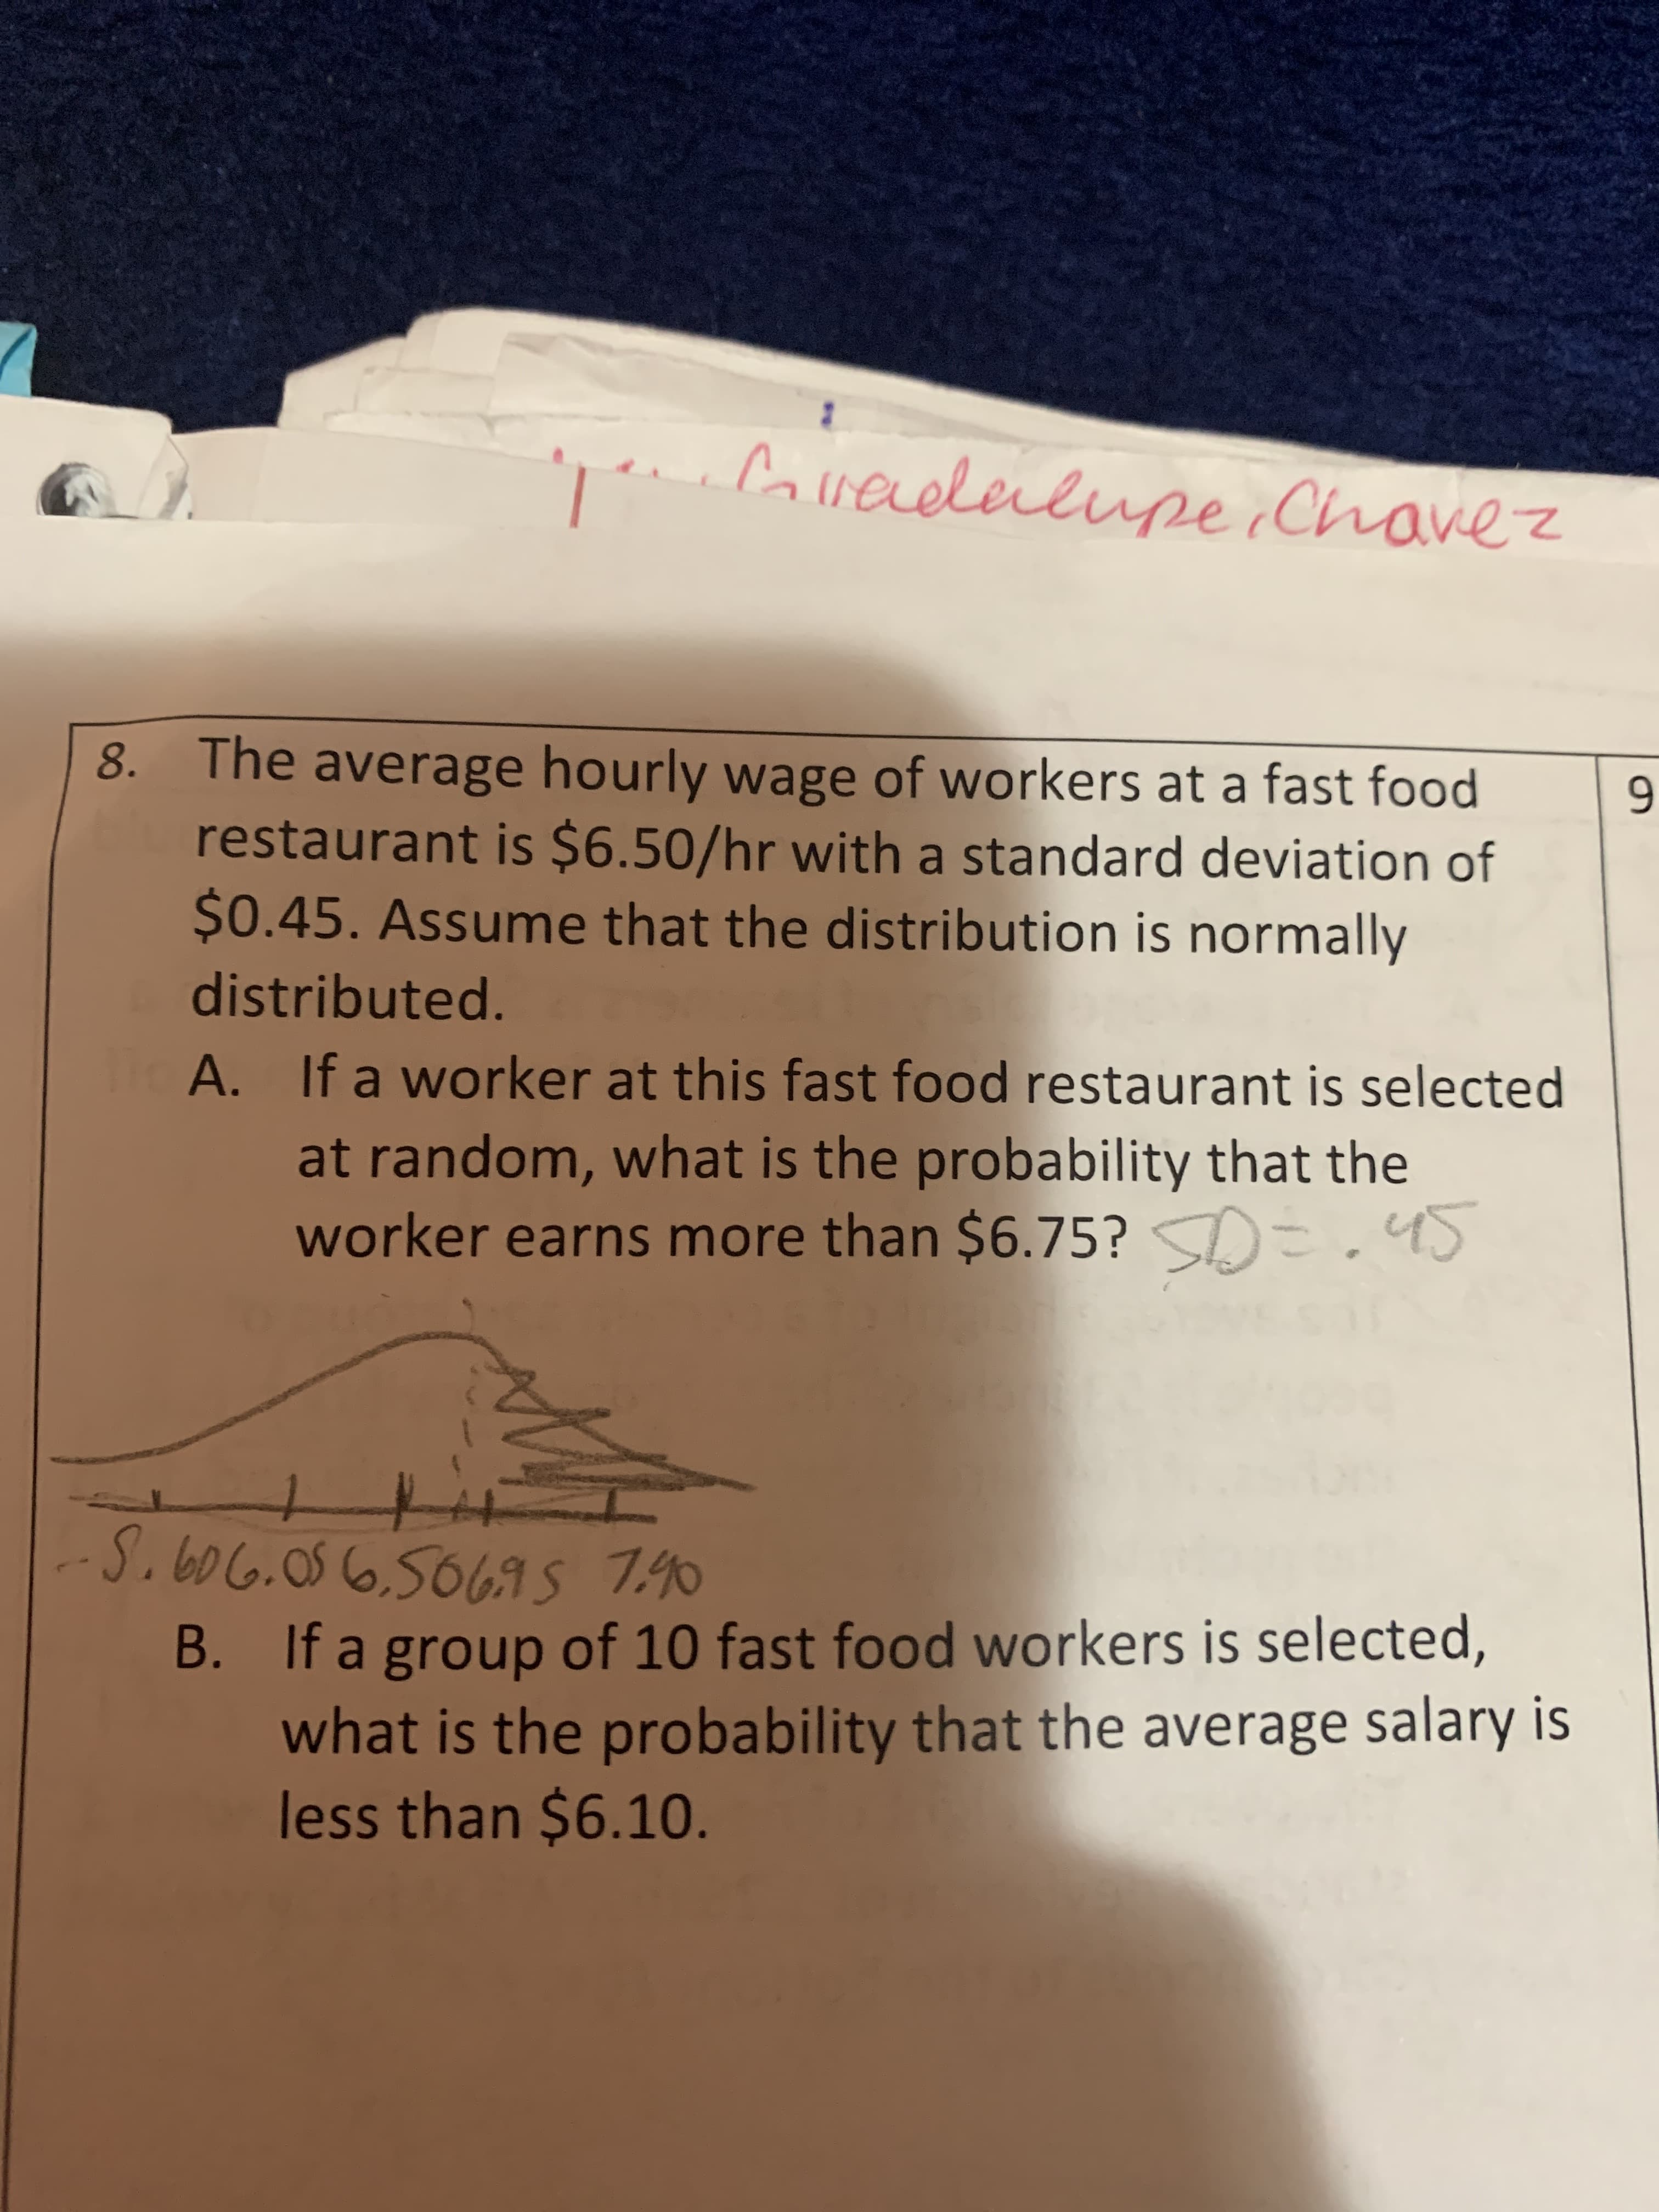 ;Coveleilupe Chavez
8. The average hourly wage of workers at a fast food
restaurant is $6.50/hr with a standard deviation of
$0.45. Assume that the distribution is normally
distributed.
If a worker at this fast food restaurant is selected
A.
at random, what is the probability that the
=.4S
worker earns more than $6.75?
S.606.056.5069s 740
B. If a group of 10 fast food workers is selected,
what is the probability that the average salary is
less than $6.10.
